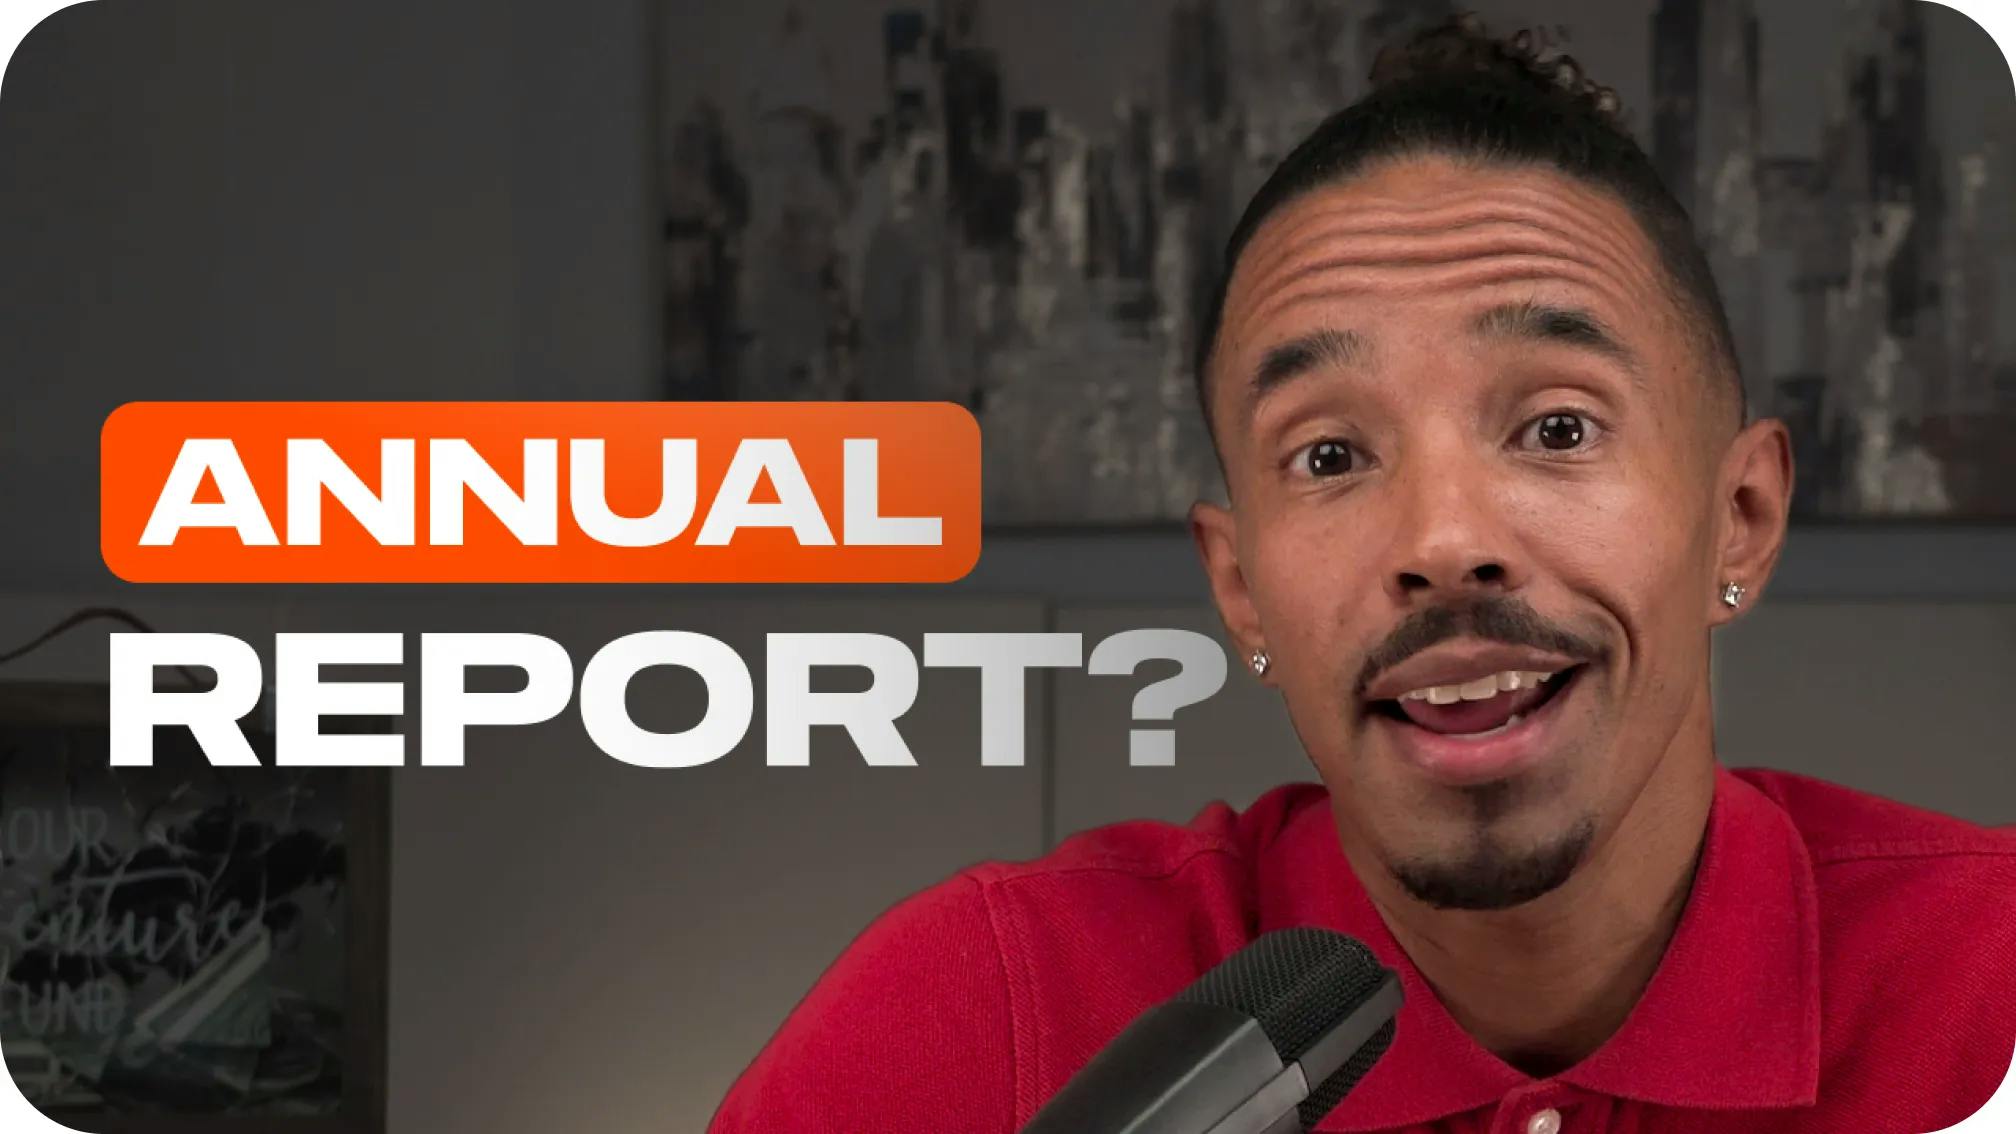 Annual report video thumbnail